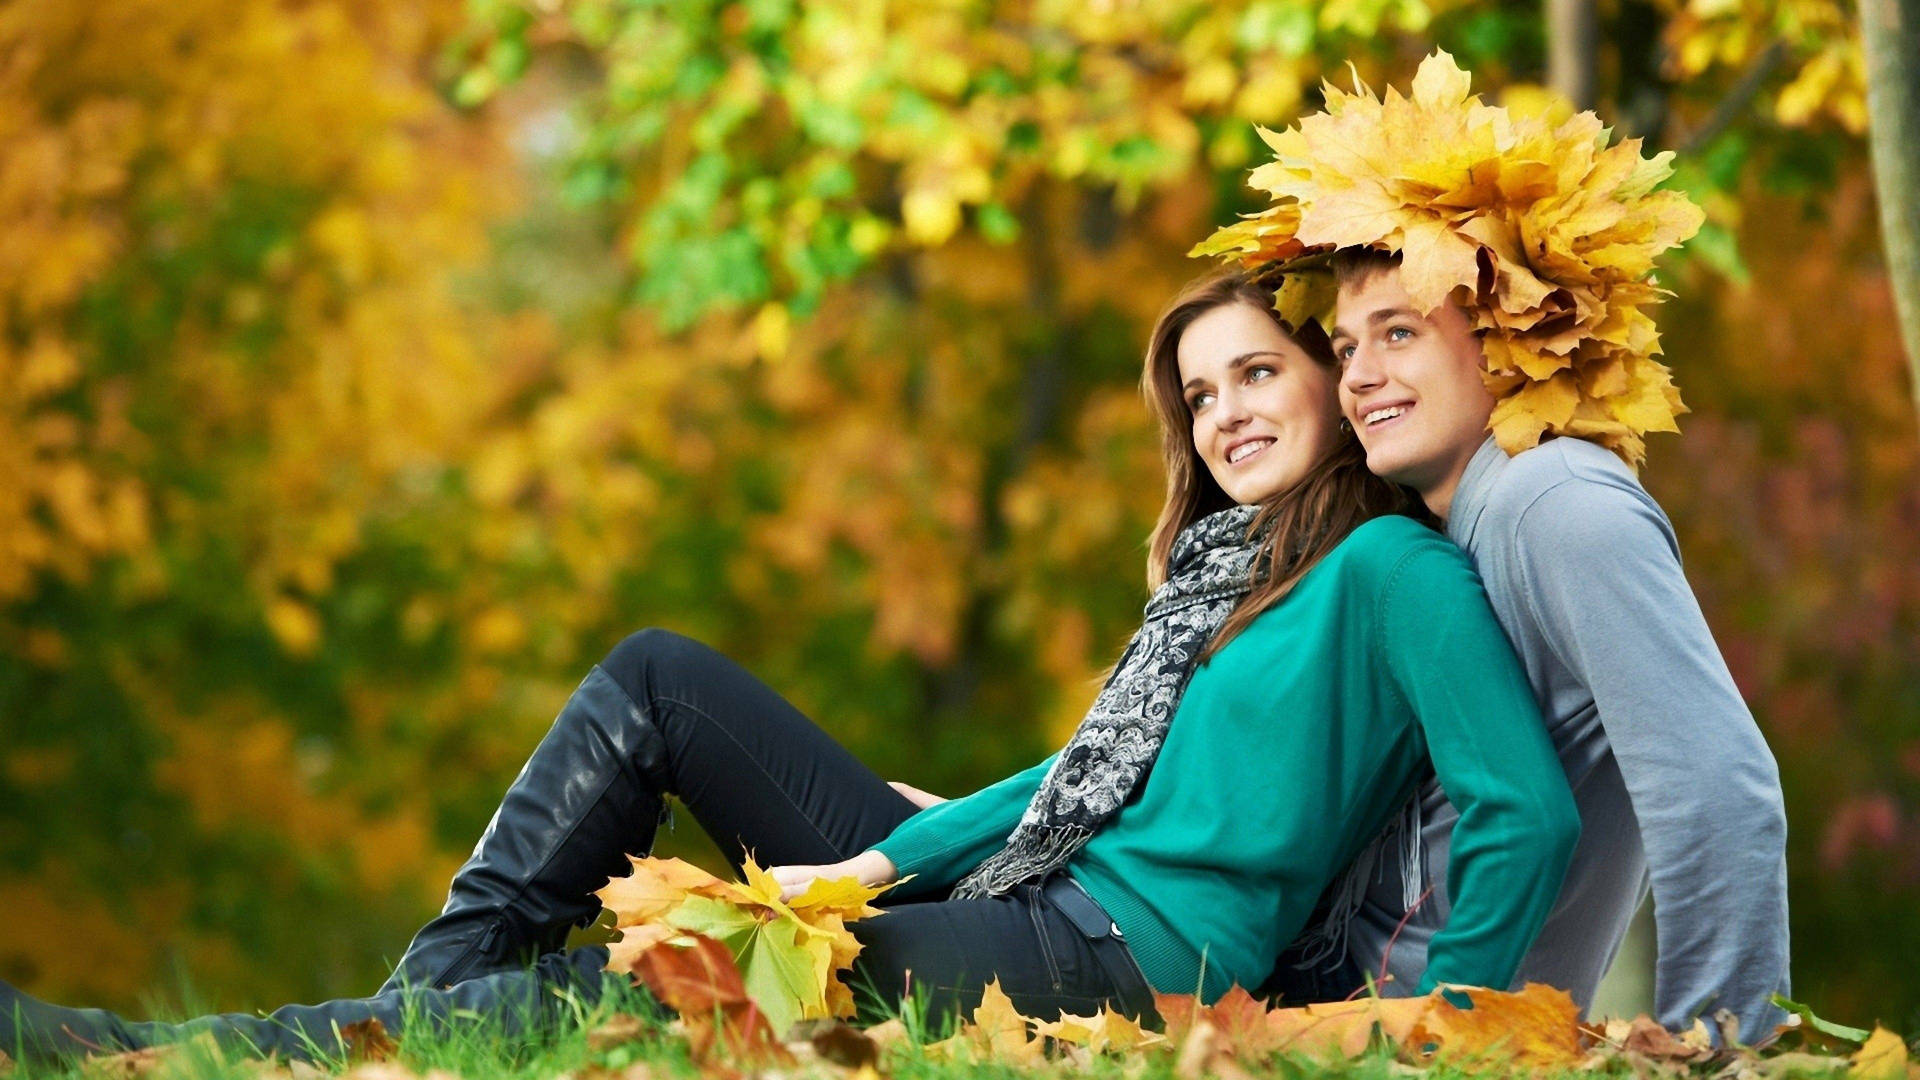 Couple Autumn Pictorial Background